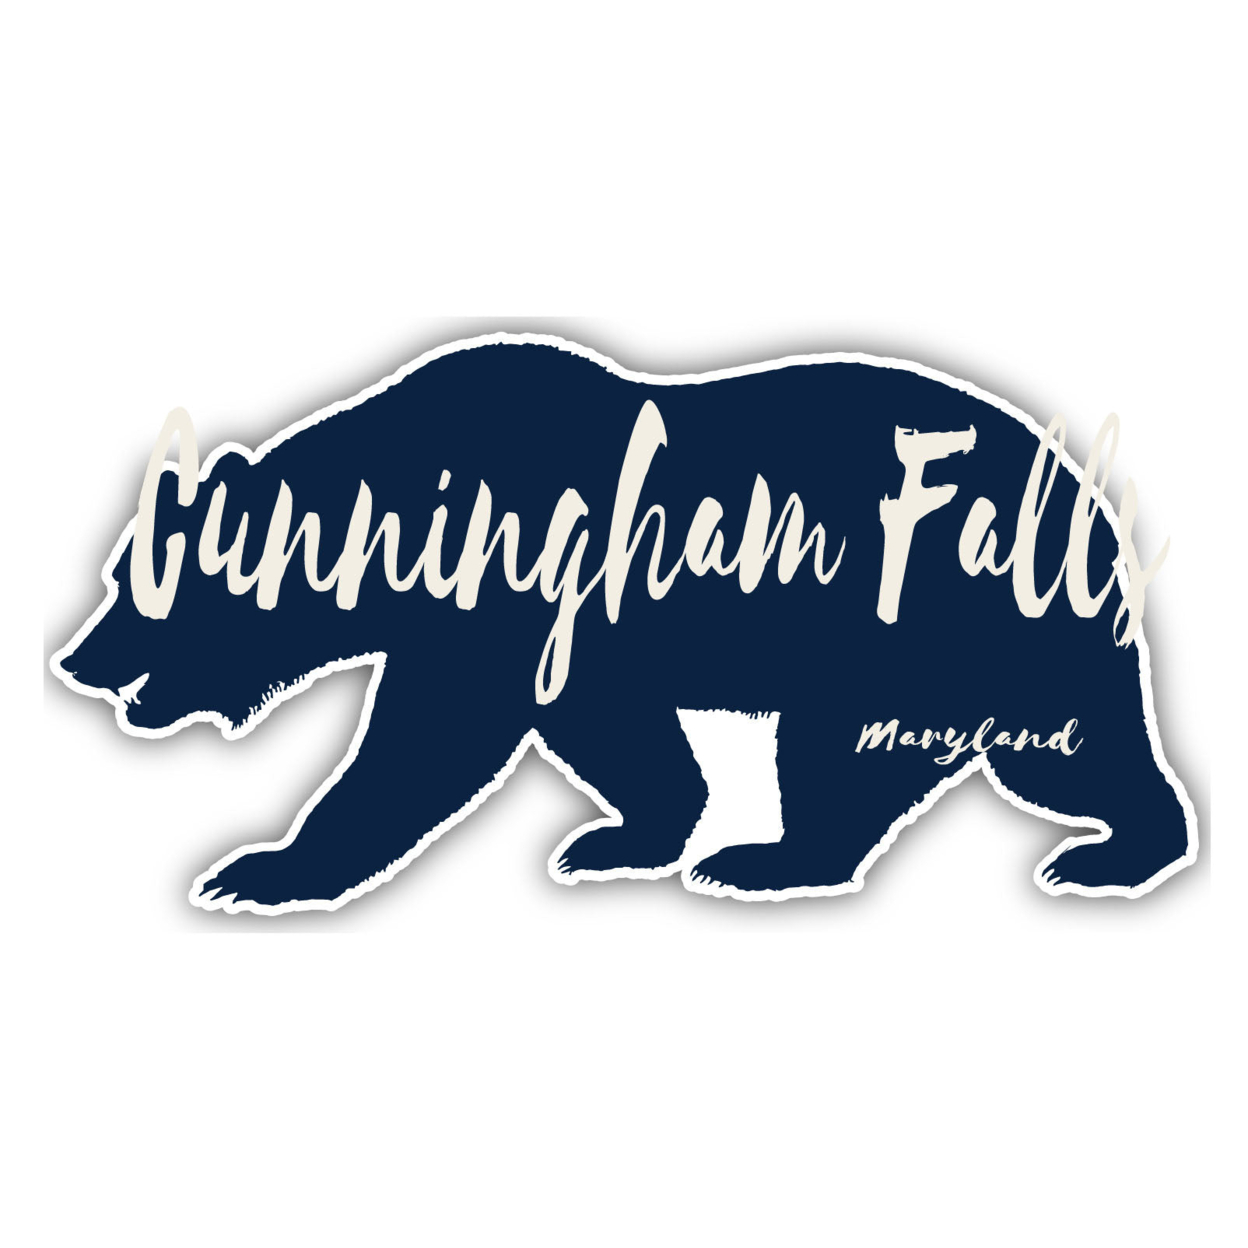 Cunningham Falls Maryland Souvenir Decorative Stickers (Choose Theme And Size) - 4-Pack, 10-Inch, Bear